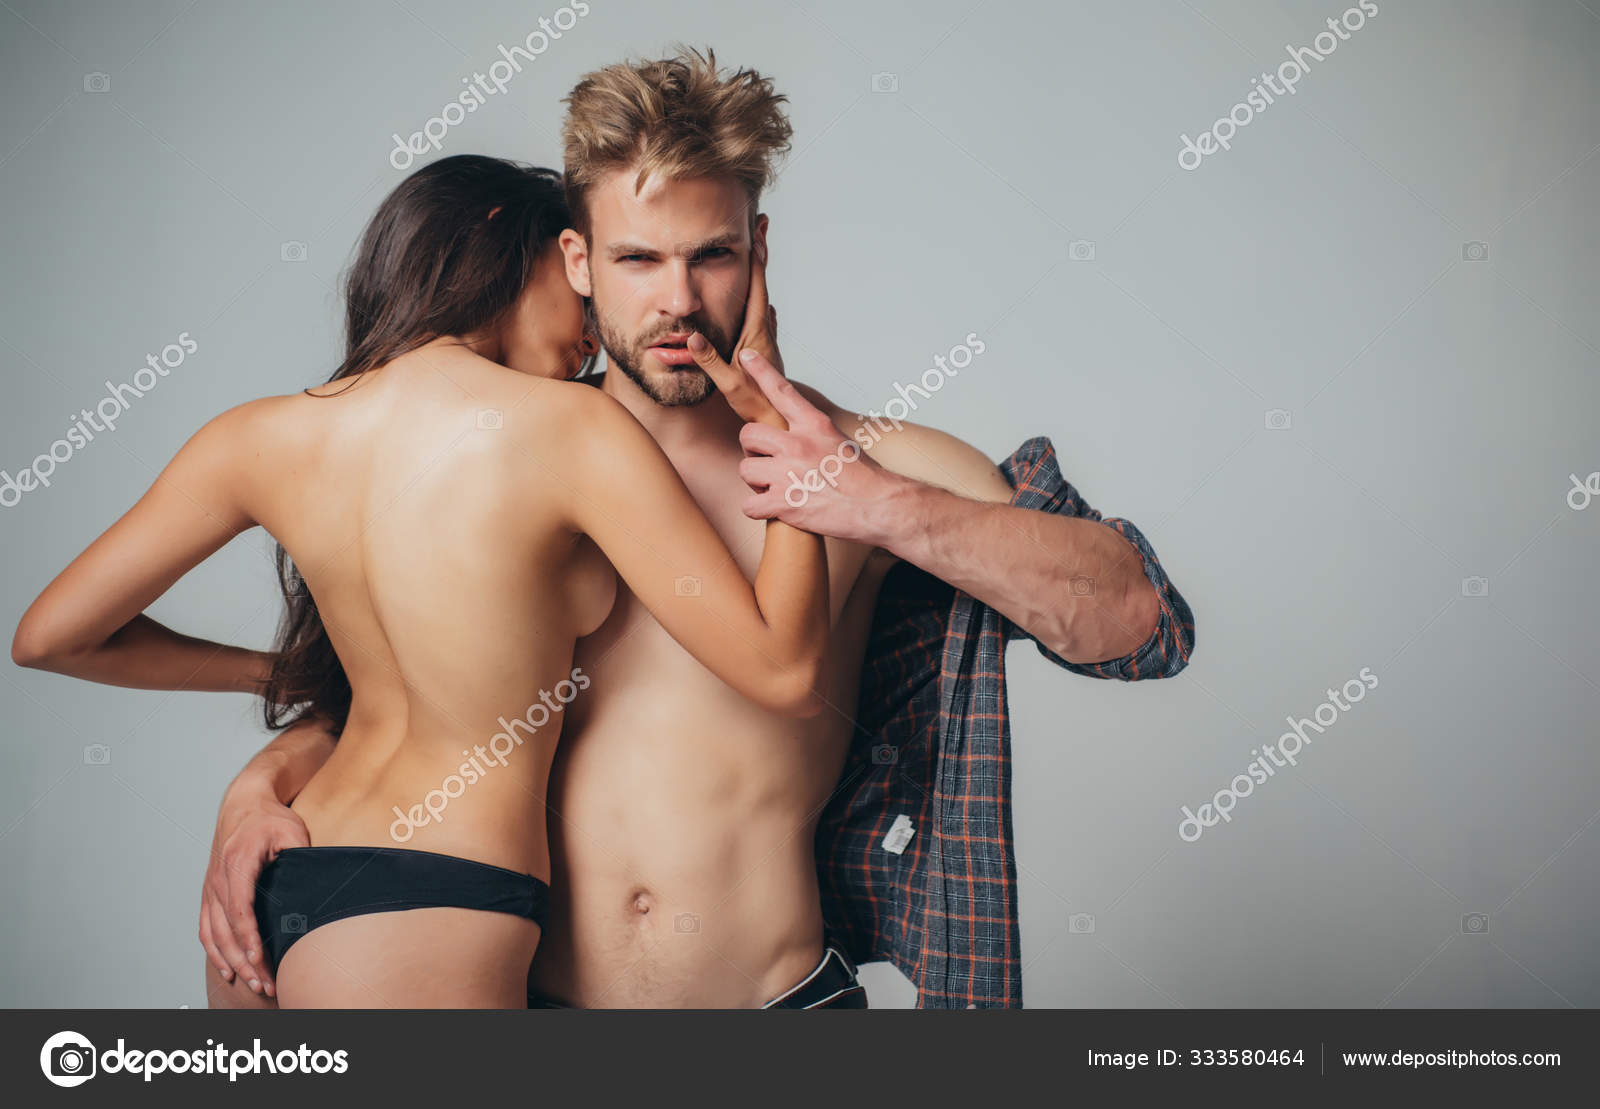 Bearded dominating man embrace his sexy topless hot girlfriend with nice fit ass. Couple in love foreplay and sex fetishist games photo